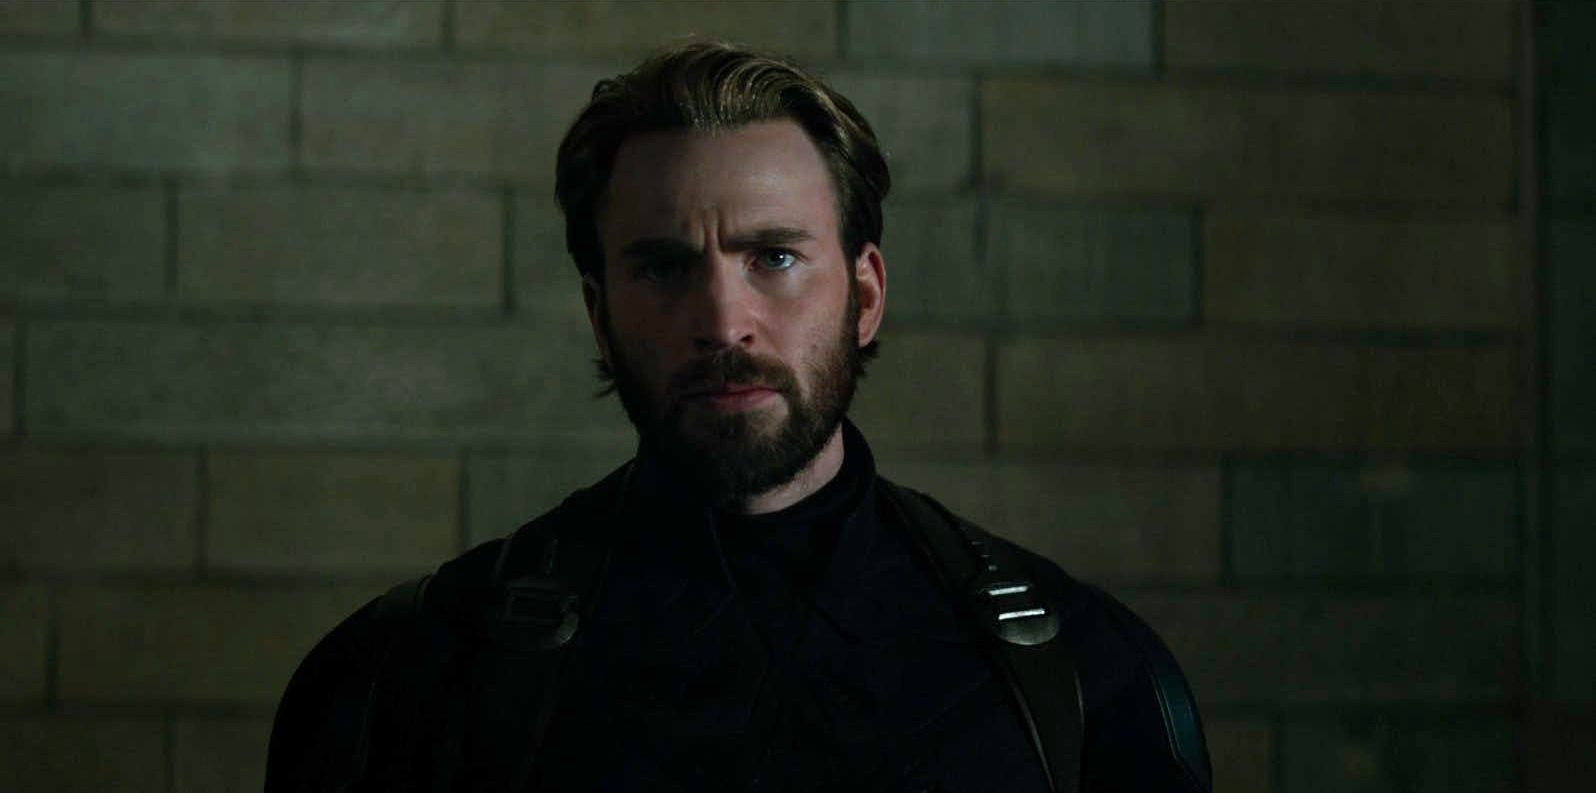 Captain America appears with a cool new beard in Avengers: Infinity War.